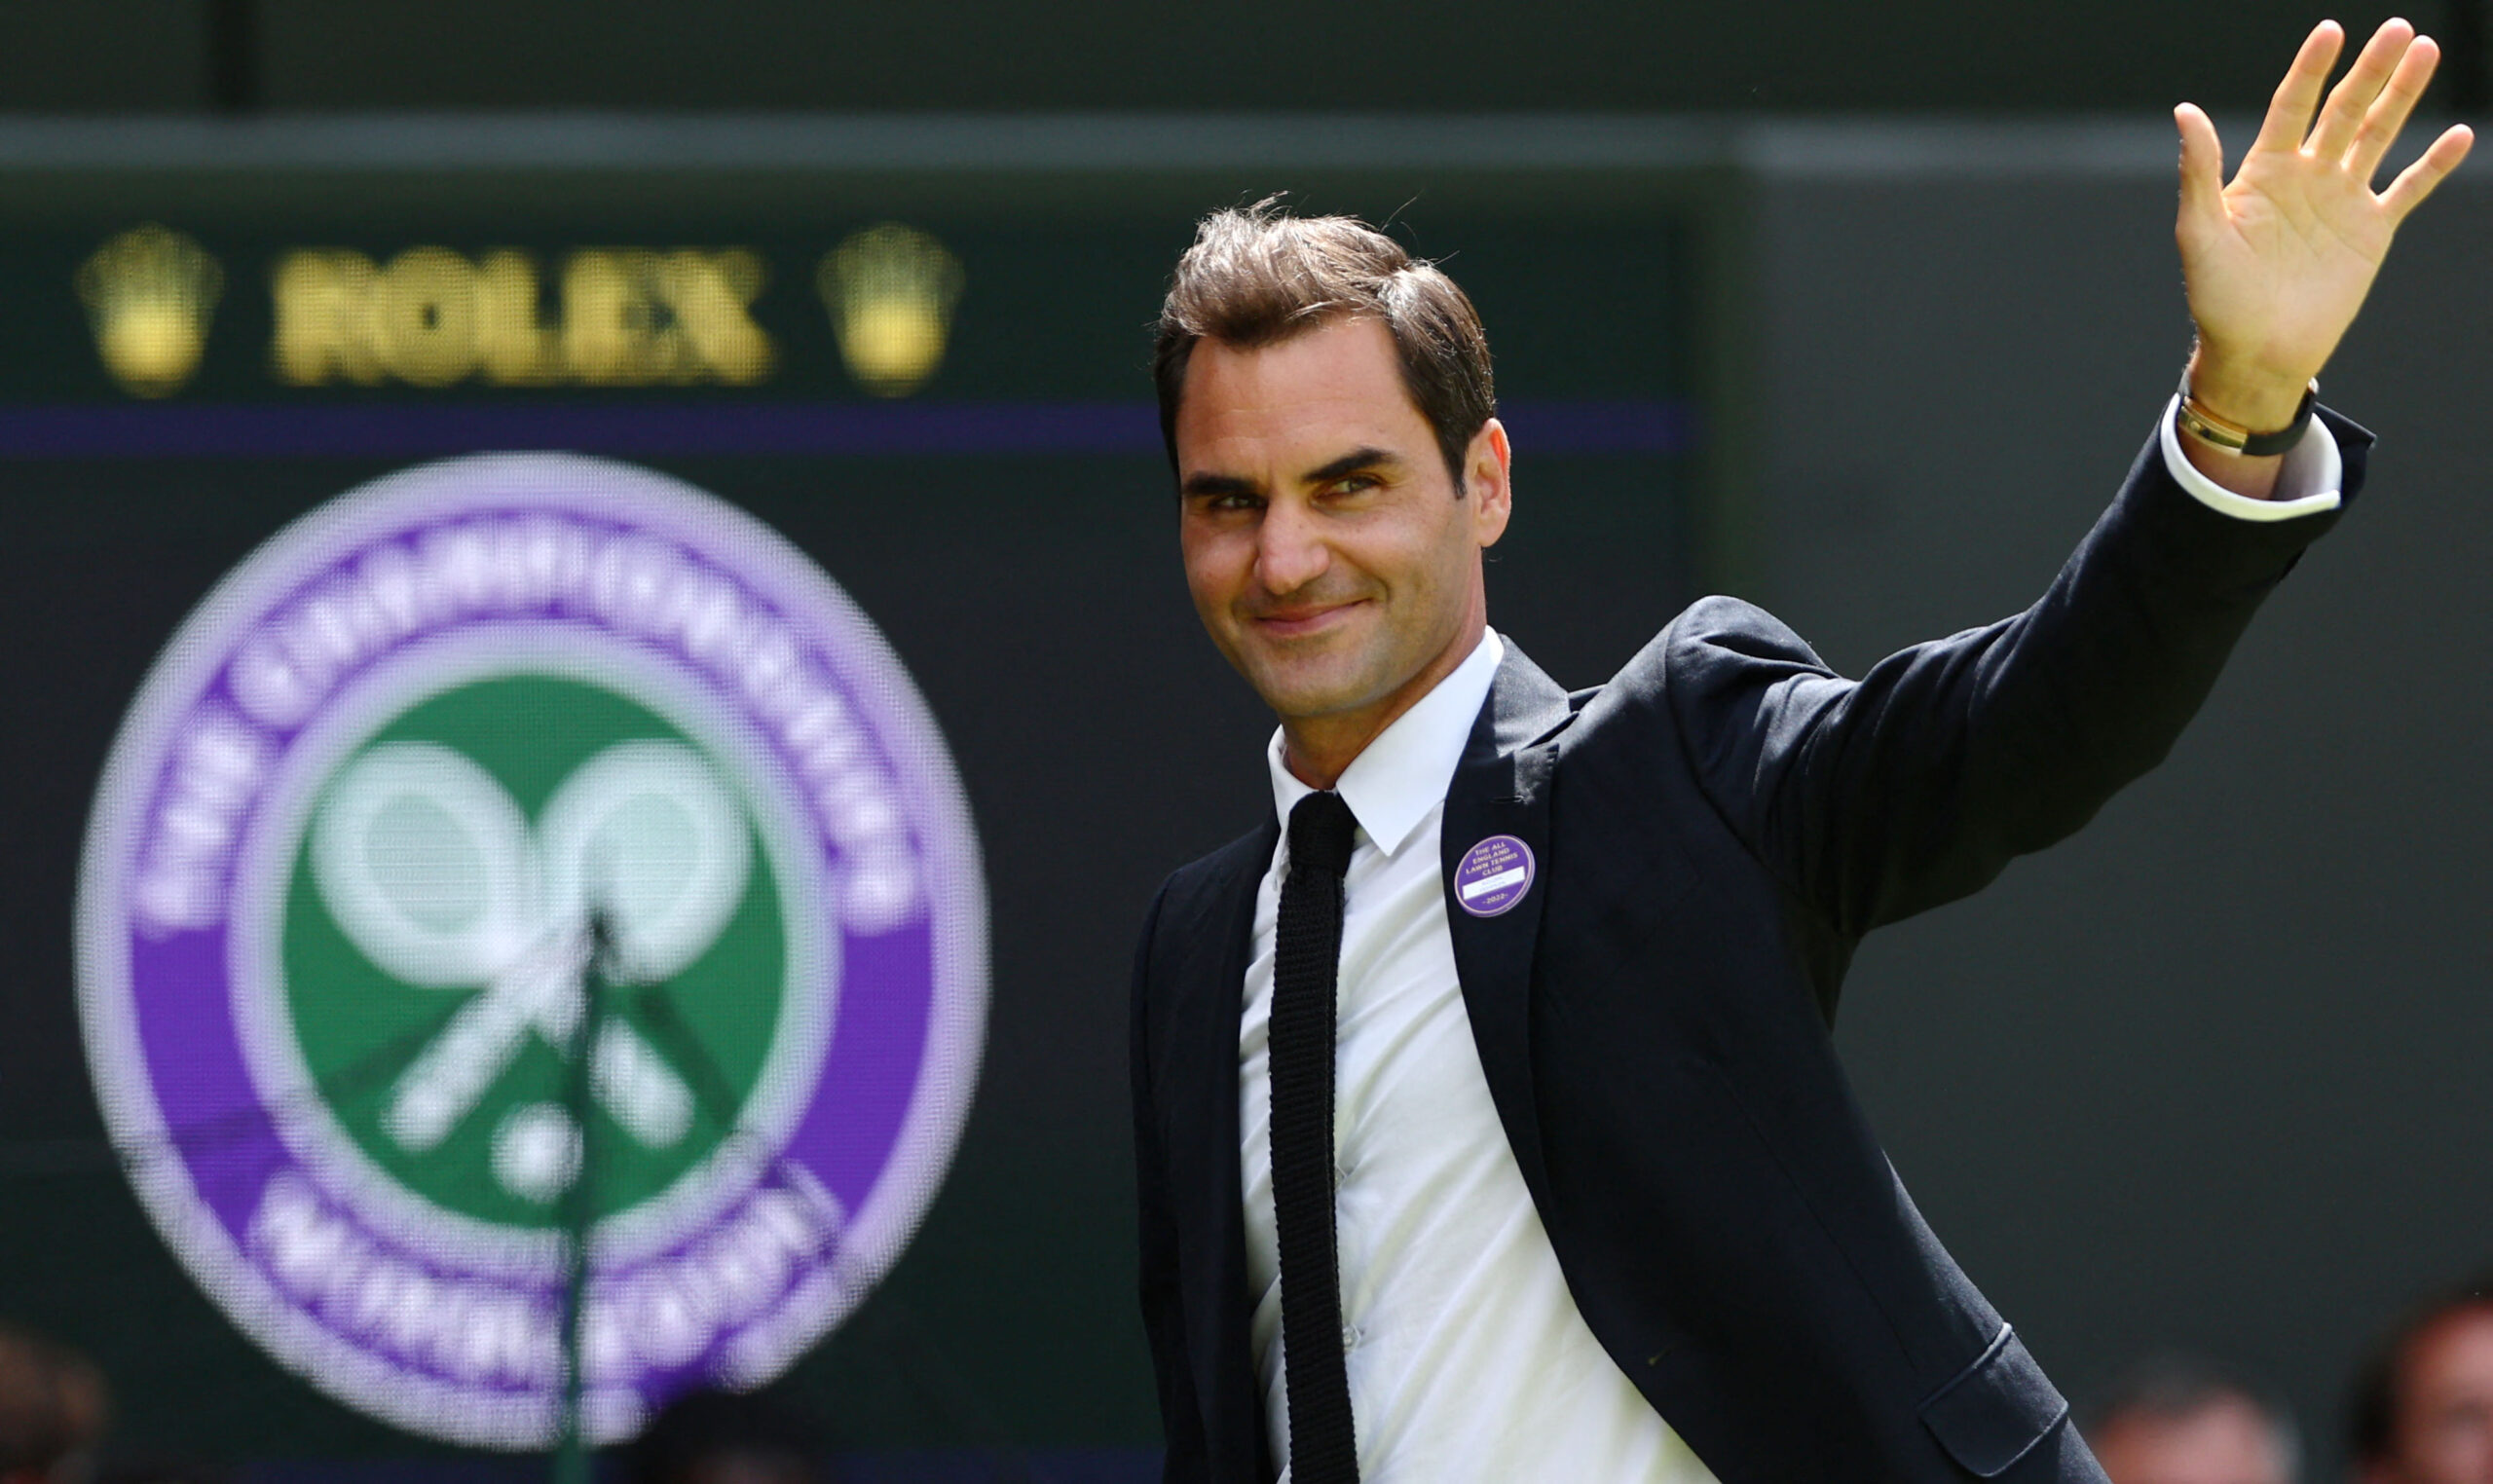 Photograph of Roger Federer at the Wimbledon Championships